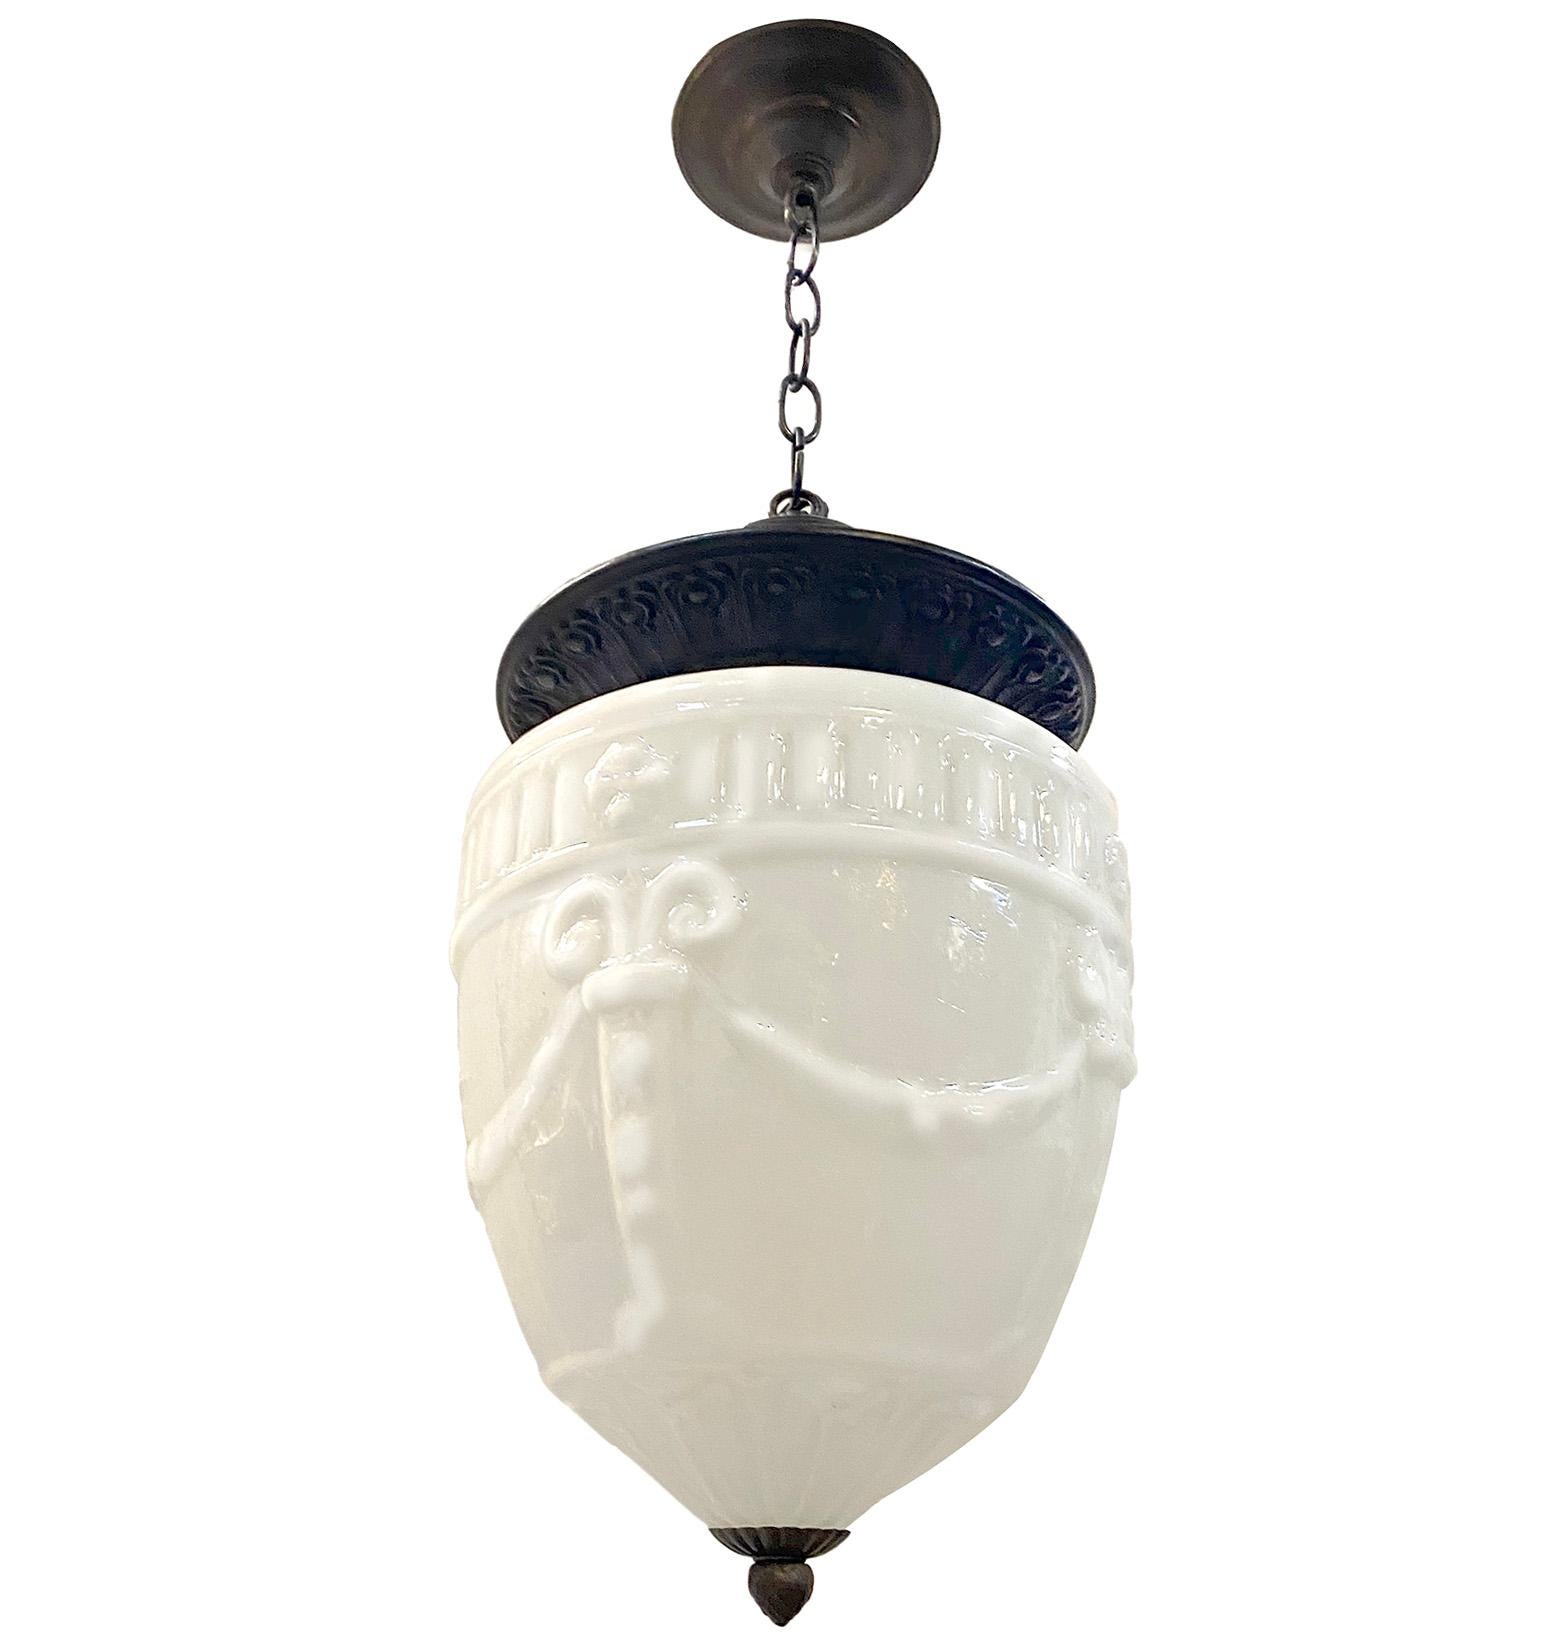 Pair of circa 1900 English molded milk glass English lanterns with column and garland motif, original hardware and interior light. Sold individually.

Measurements:
Current drop: 20